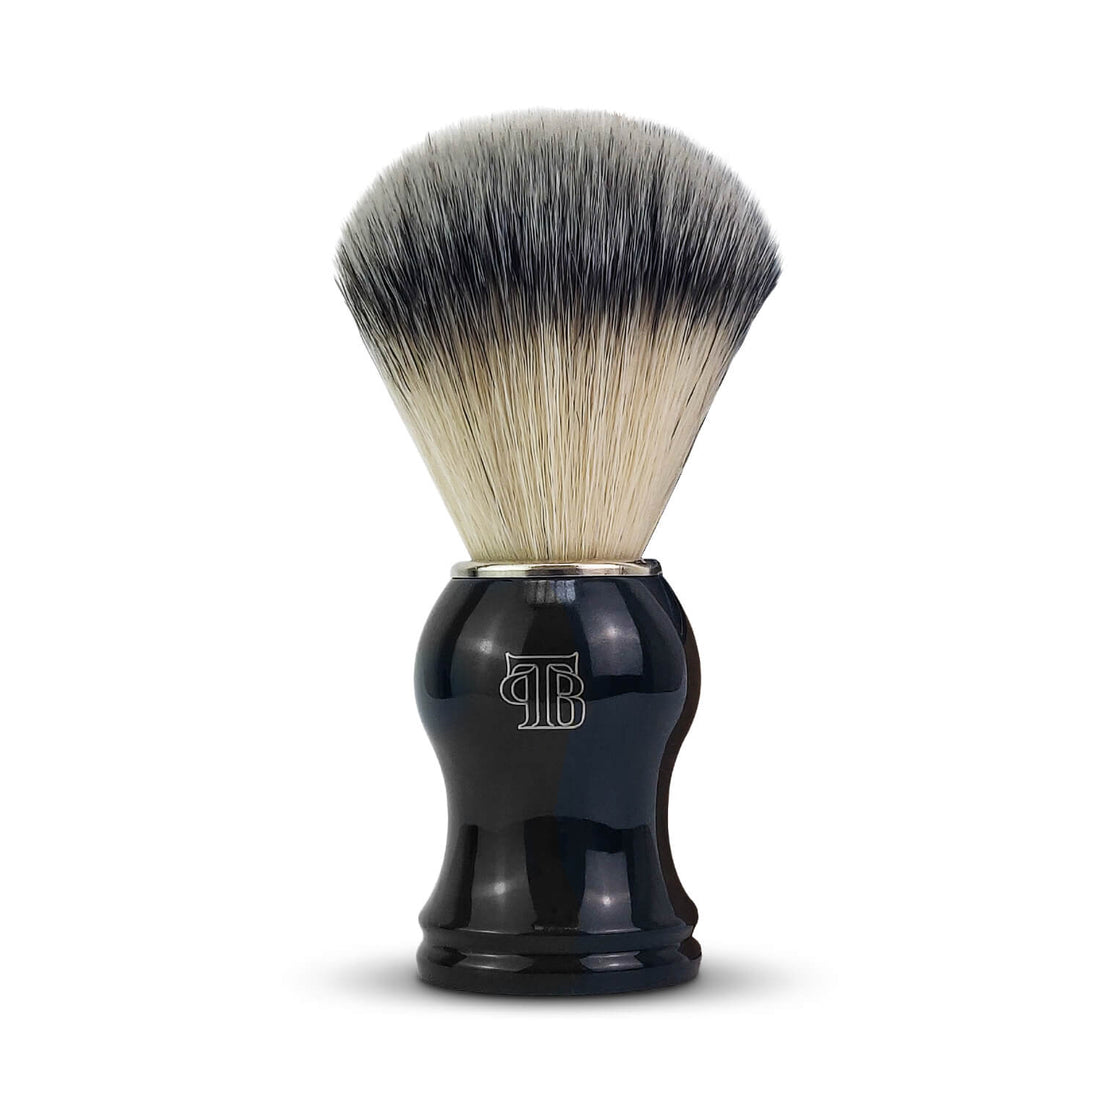 High quality synthetic hair shaving brush with black handle and chrome collar on a white background